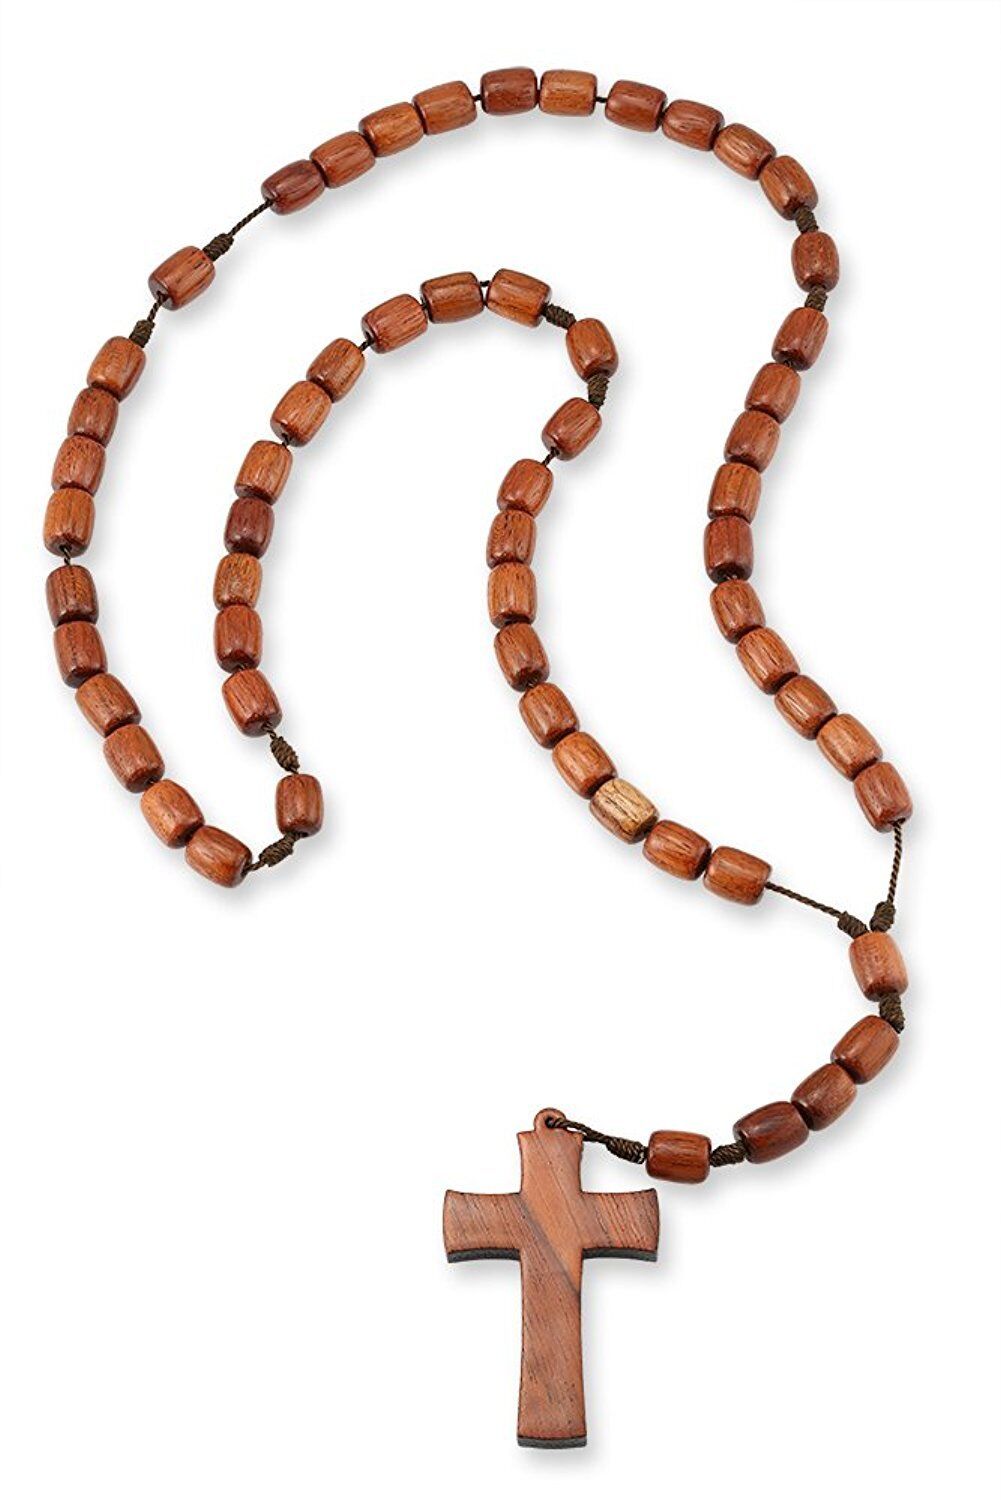 Brown Jatoba Wooden Beads Catholic Rosary Necklace with Cross Crucifix, 21 Inch